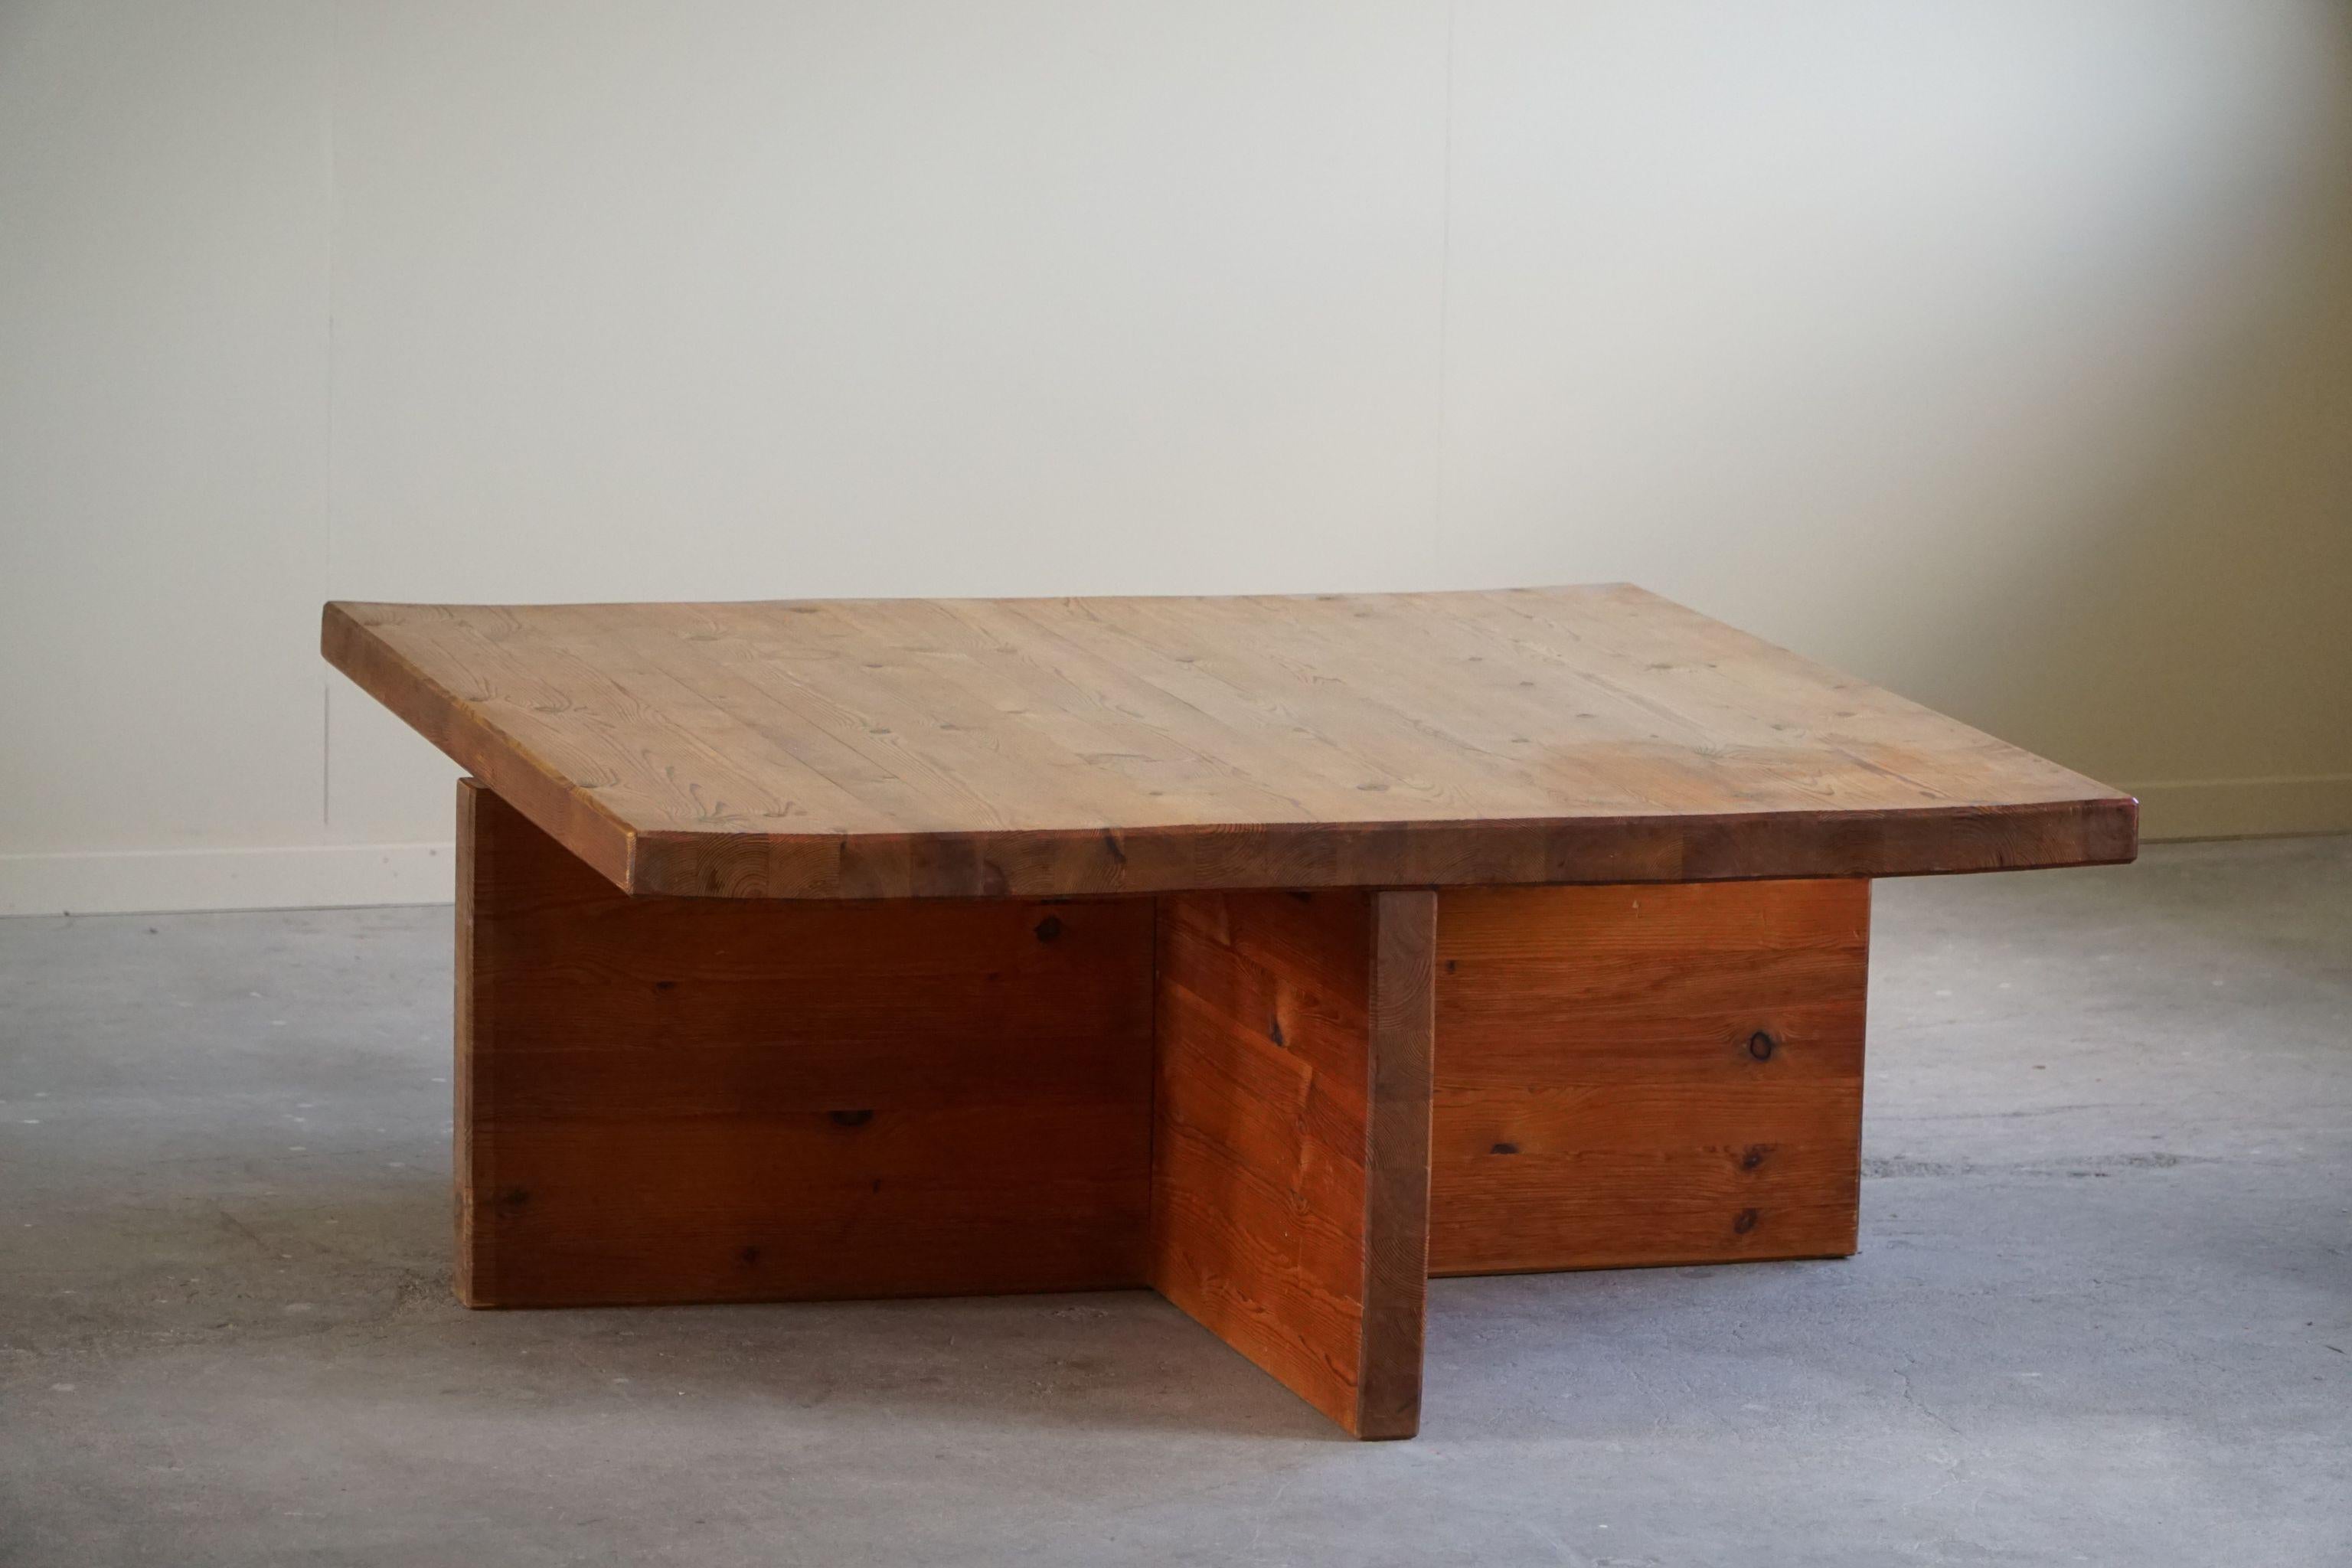 Swedish Modern Solid Pine Coffee Table by Sven Larsson, Brutalist, 1970s In Good Condition For Sale In Odense, DK